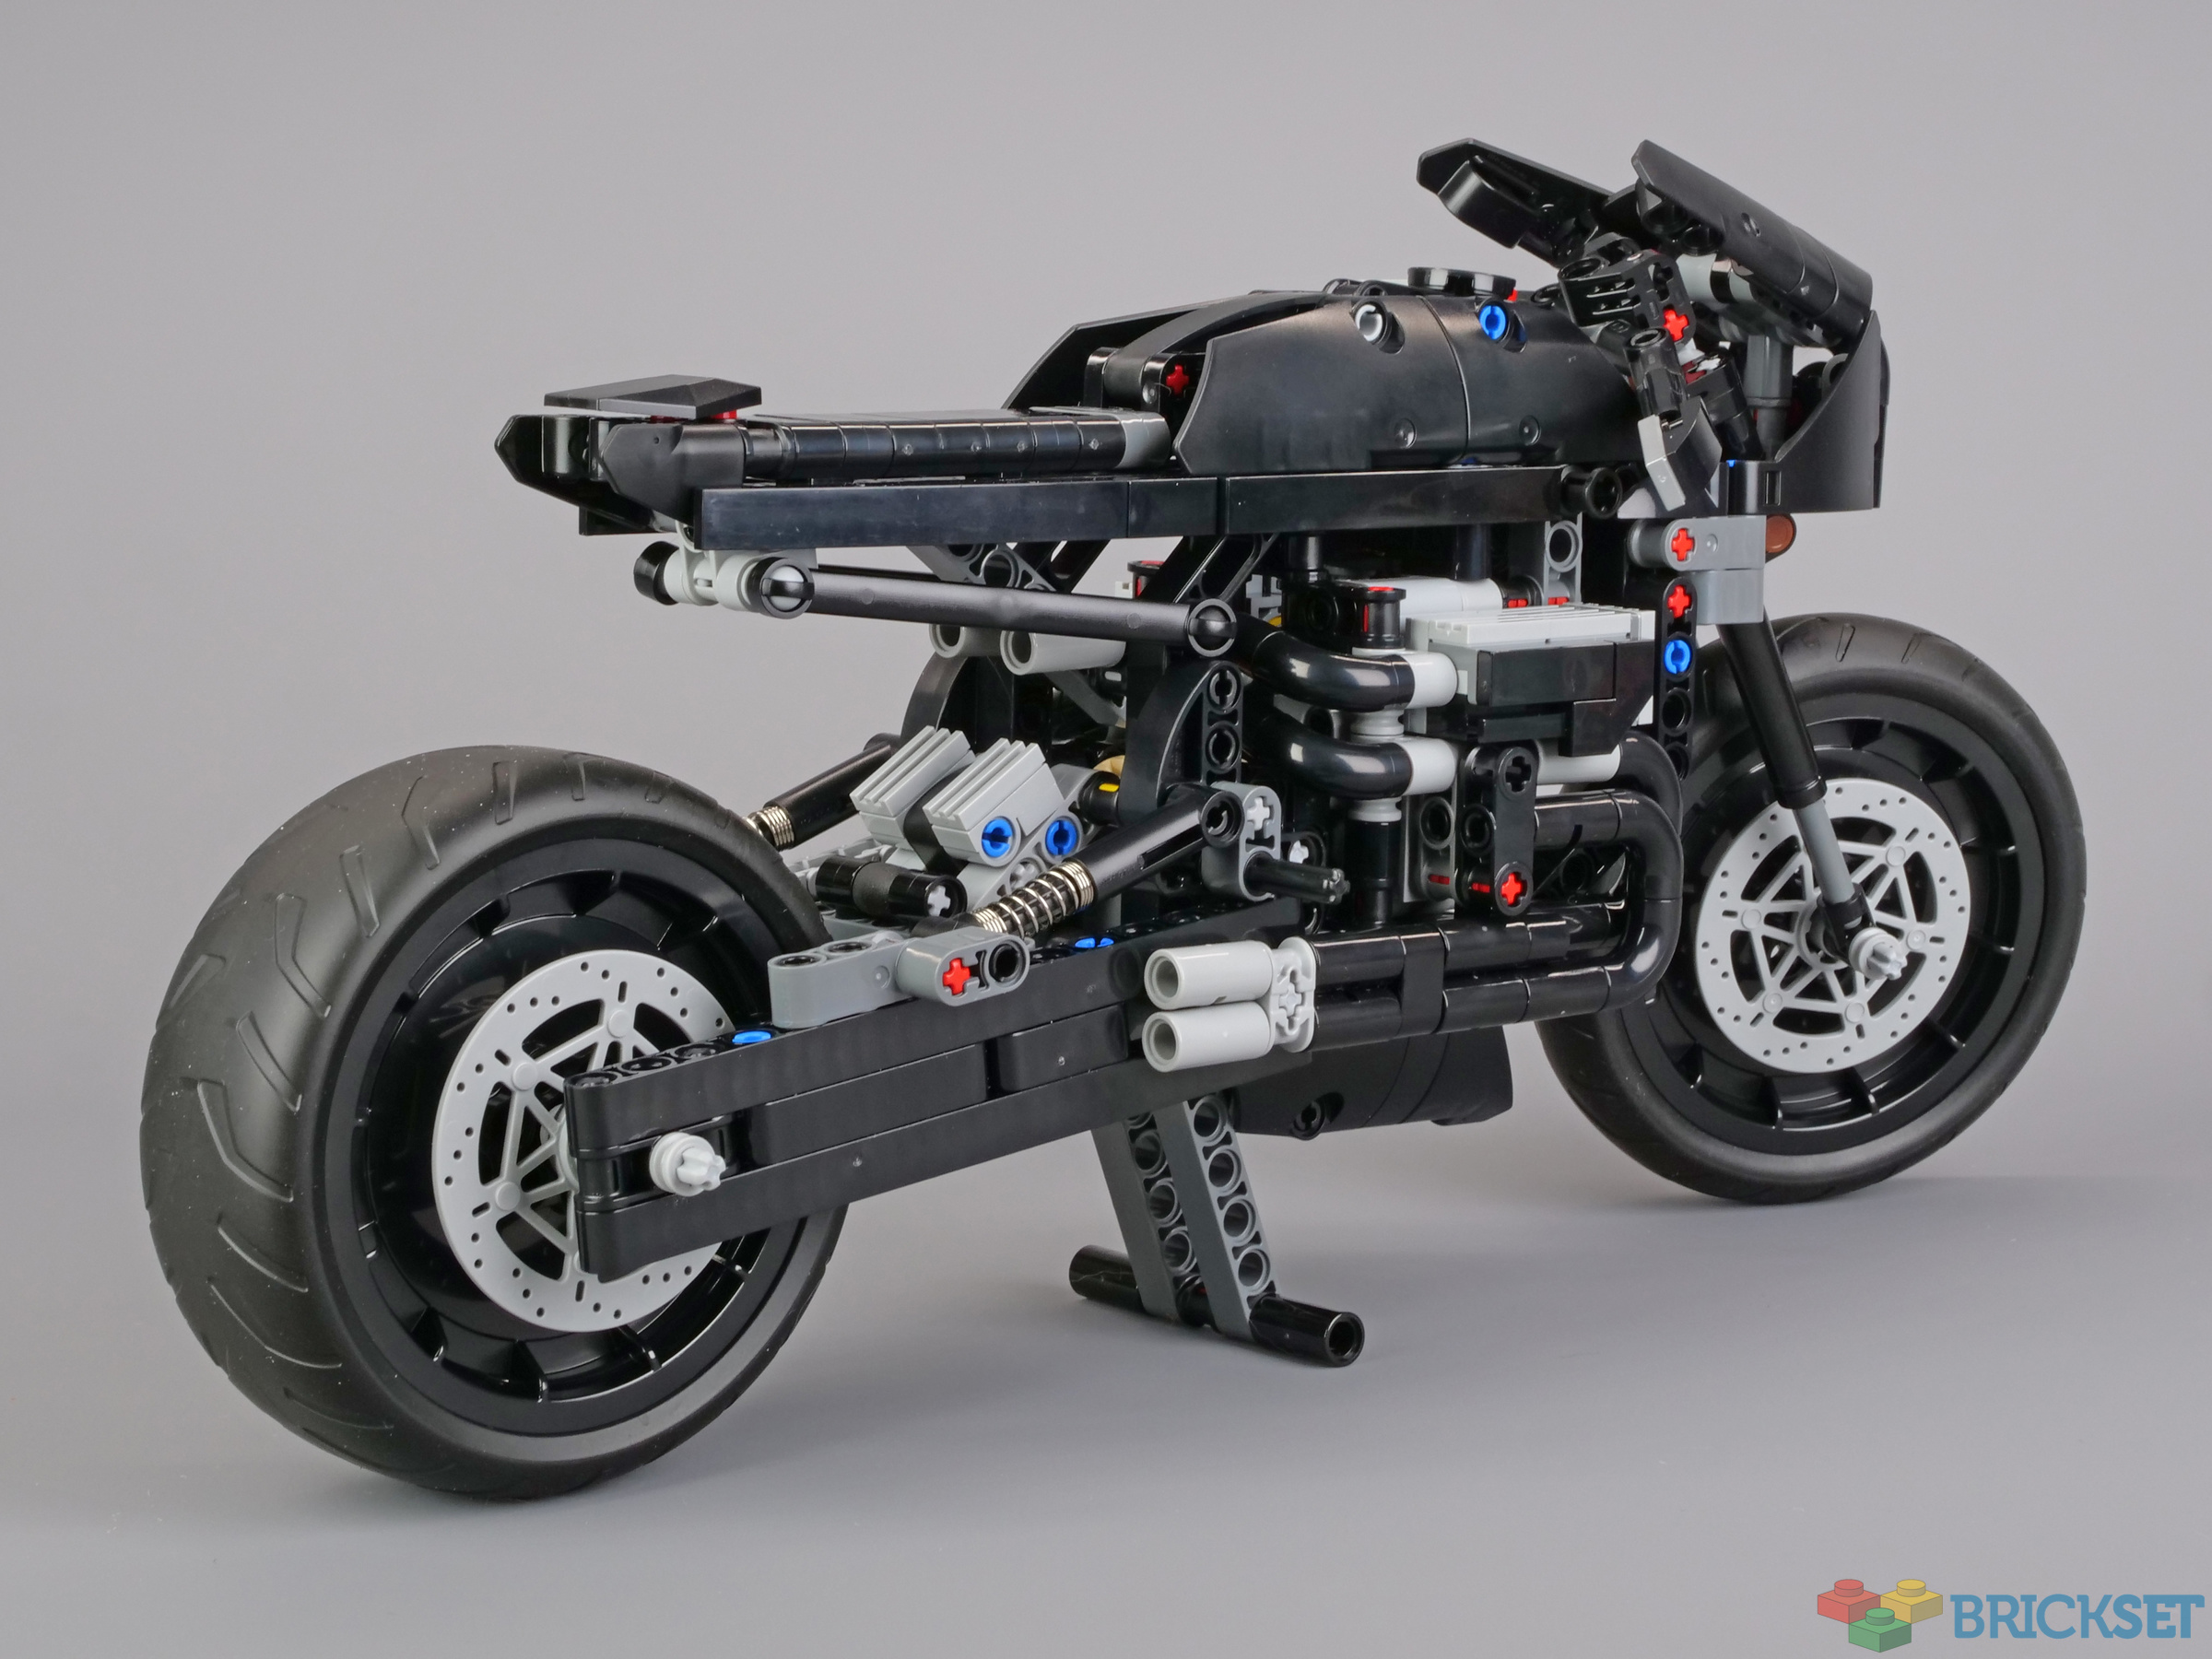 LEGO Technic 42155 The Batman Batcycle [Review] - The Brothers Brick